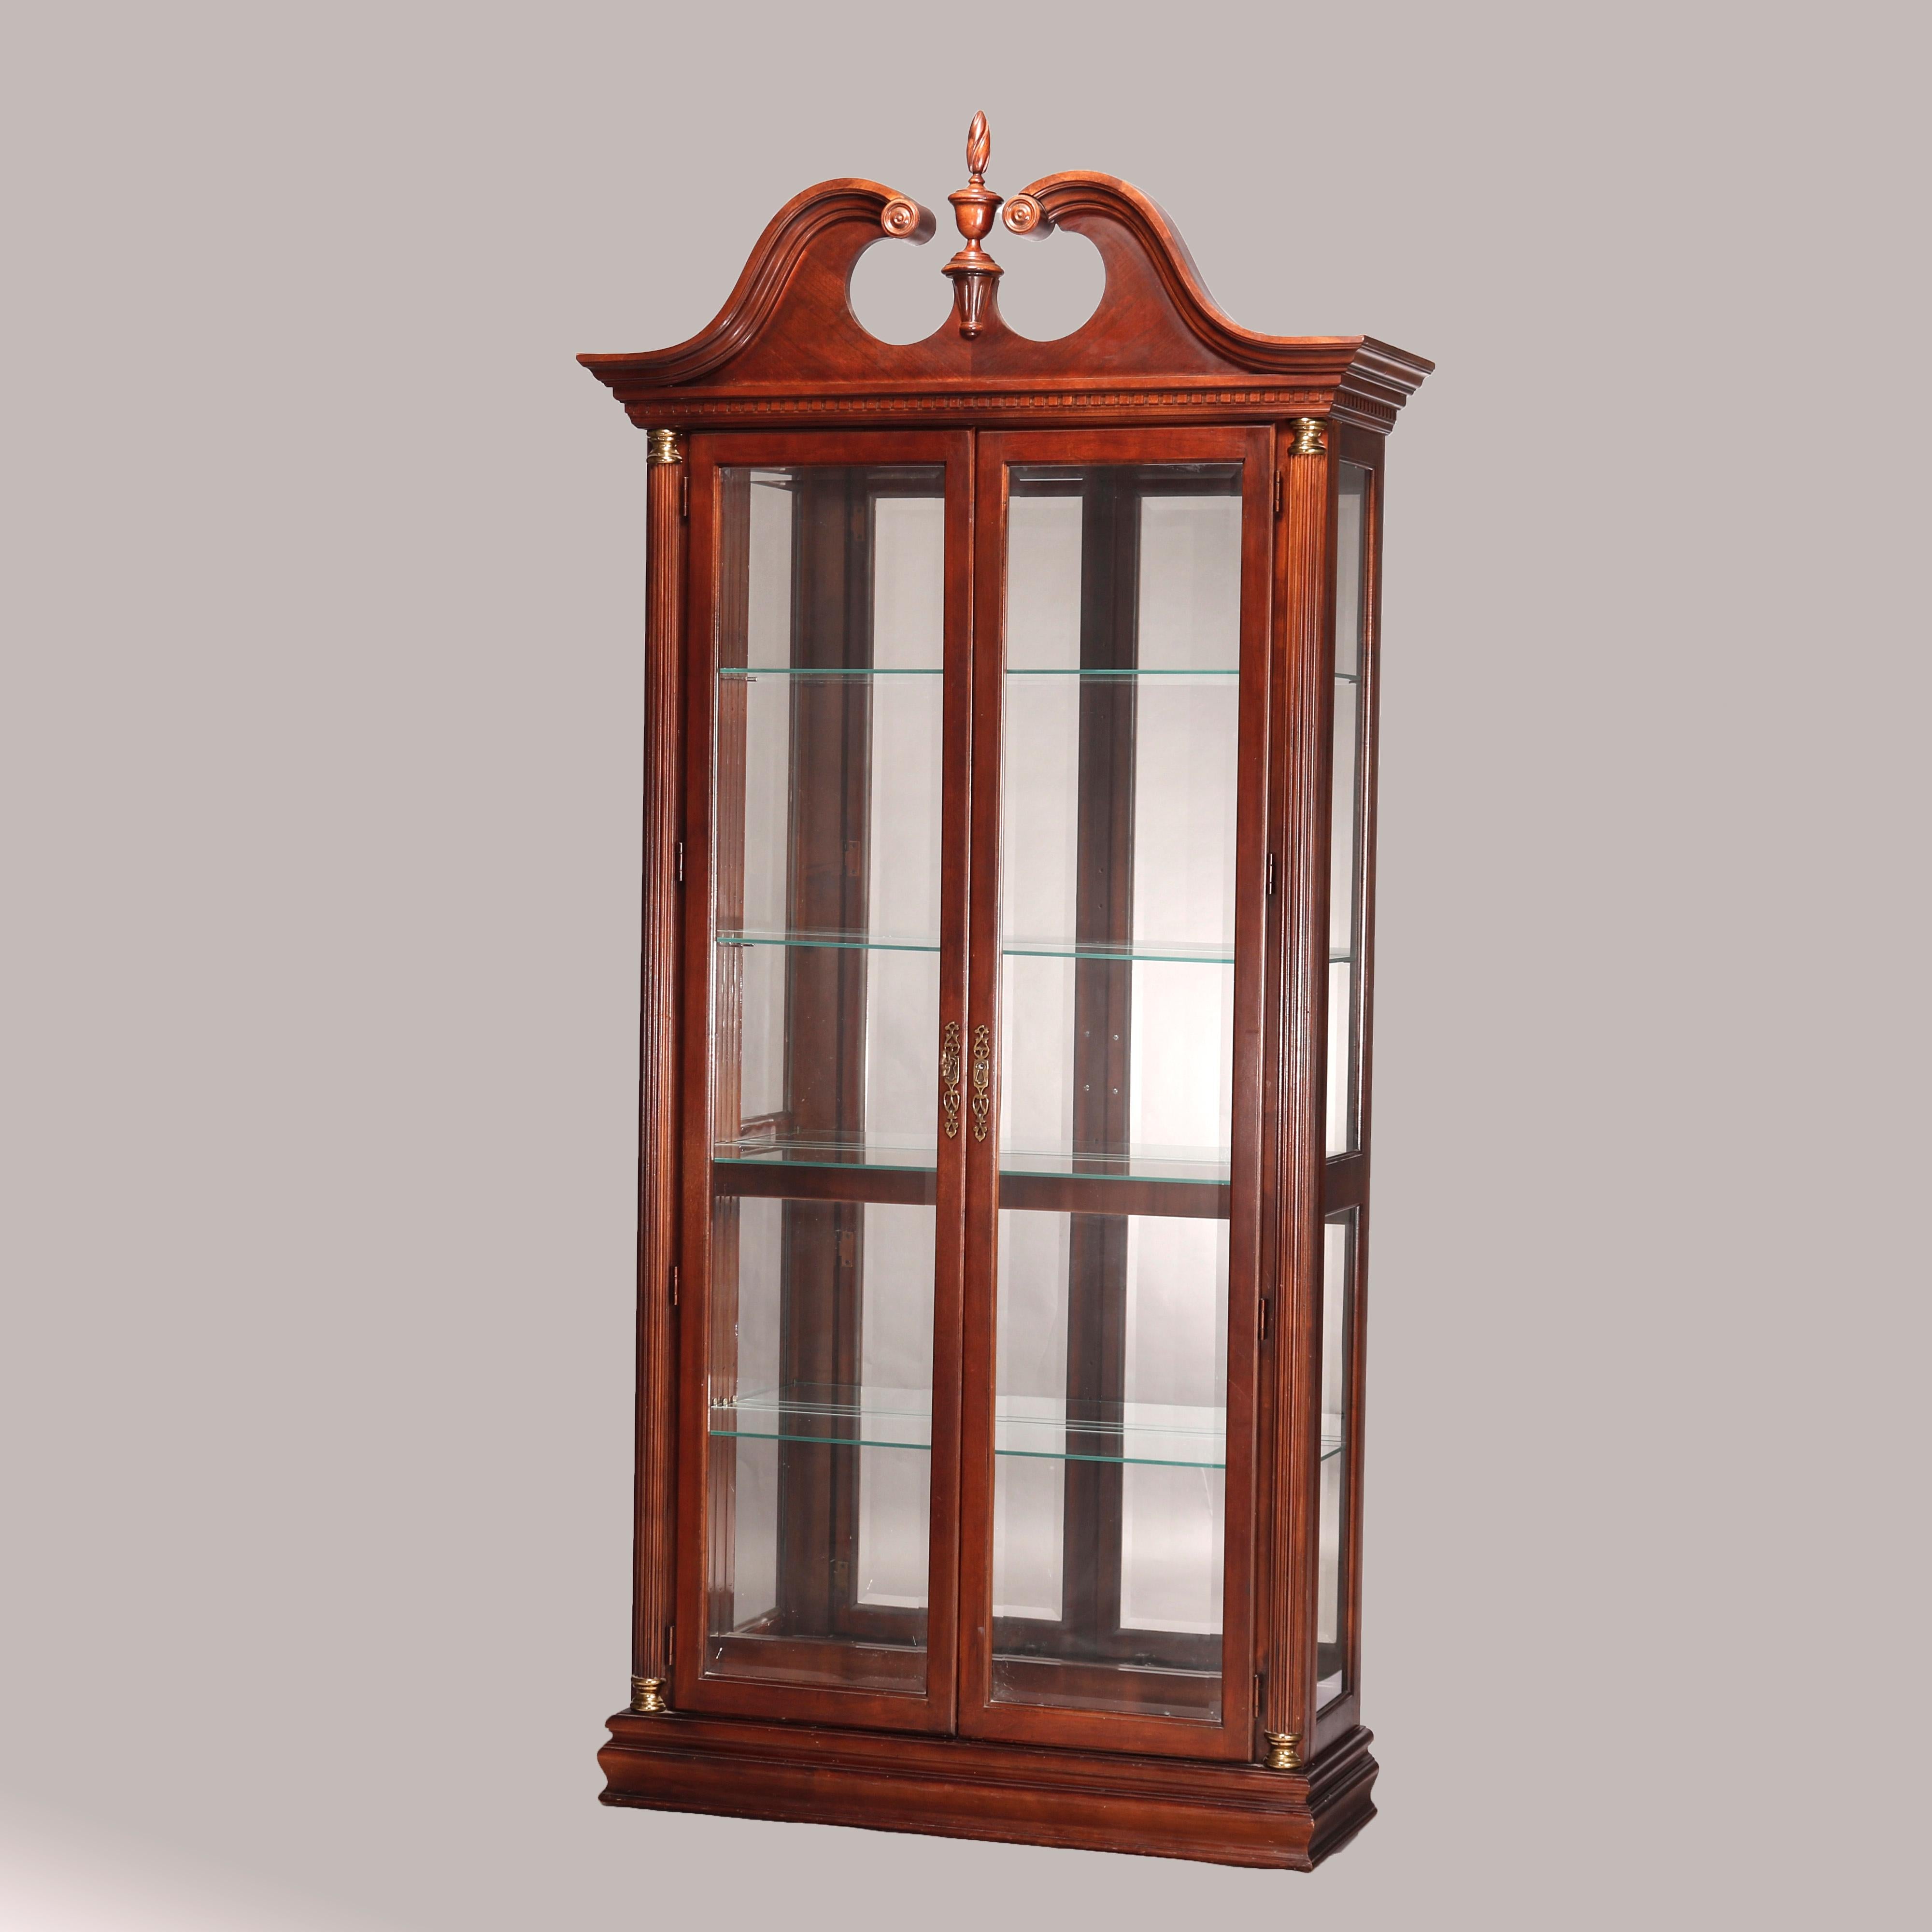 A Federal style display case by Pulaski offers mahogany construction with broken arch crest having central carved finial over case having double glass doors opening to shelved and mirrored interior, flanking reeded Greco Doric style columns with